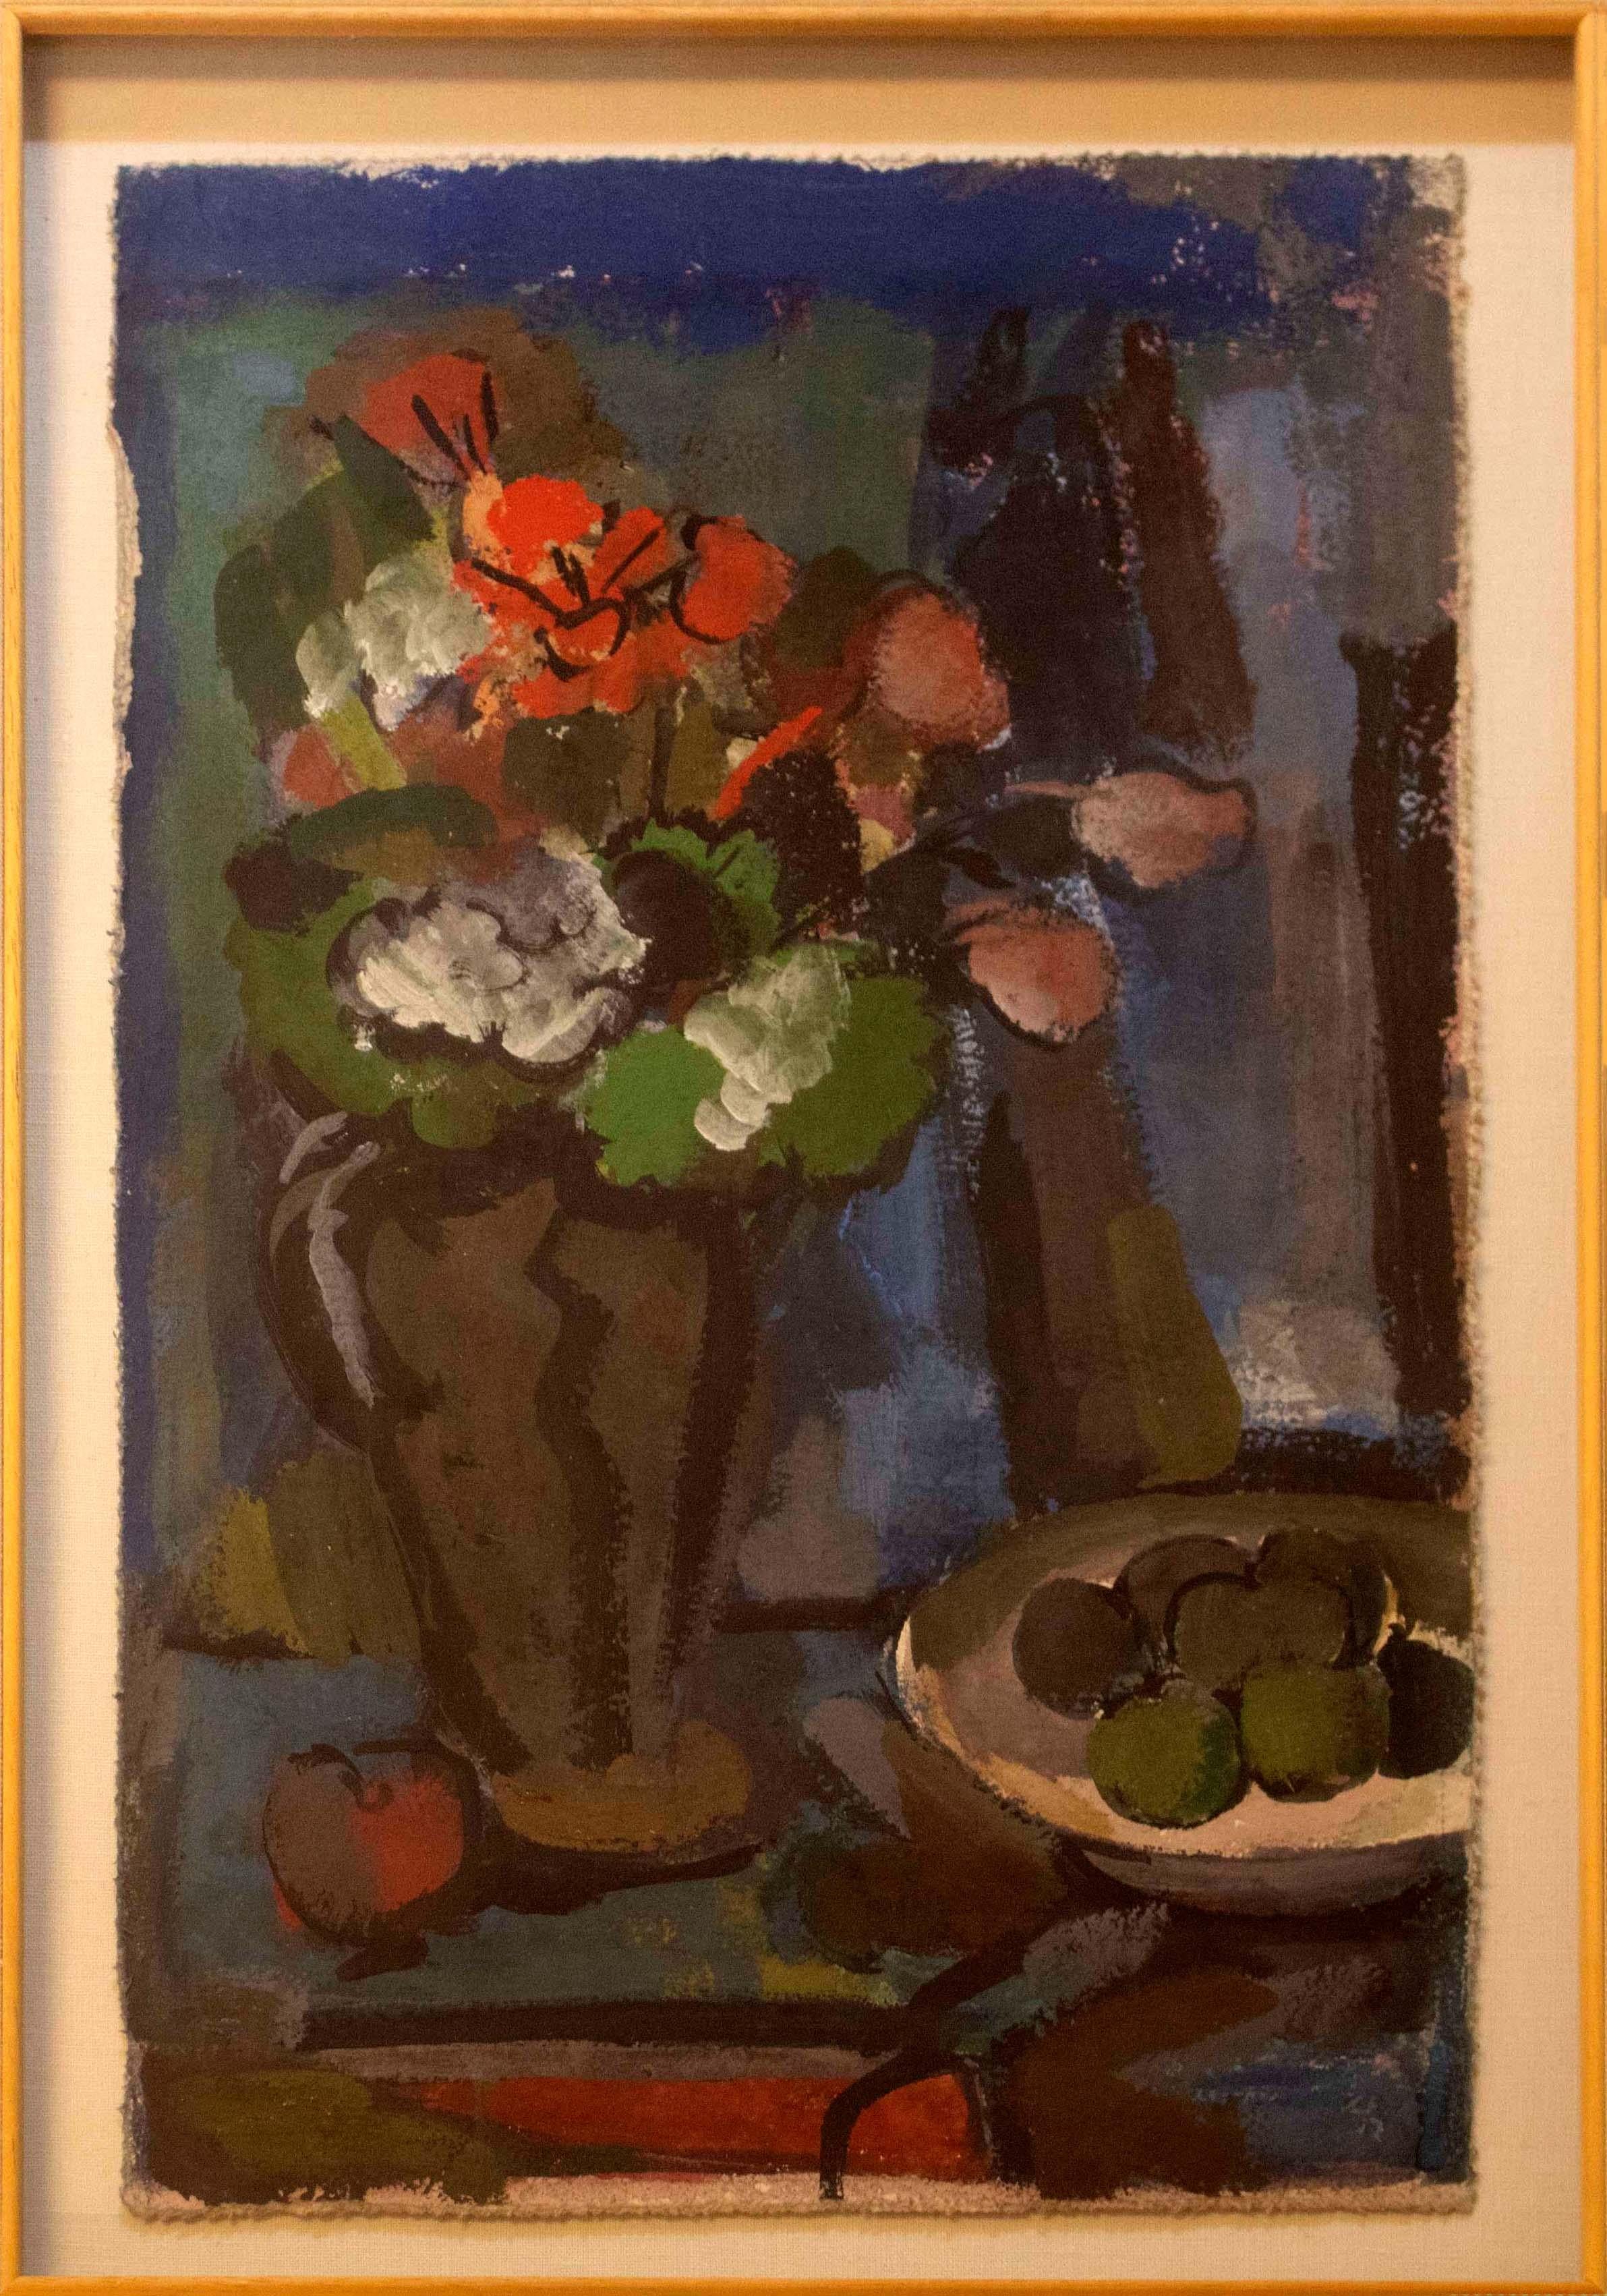 For your consideration is a lovely tempura still life titled Geraniums painted by Elsa Warner in 1950. This painting was acquired from a curator and gallery owner from Los Angeles with a collection of artworks ranging from Barry McGee to Picasso.